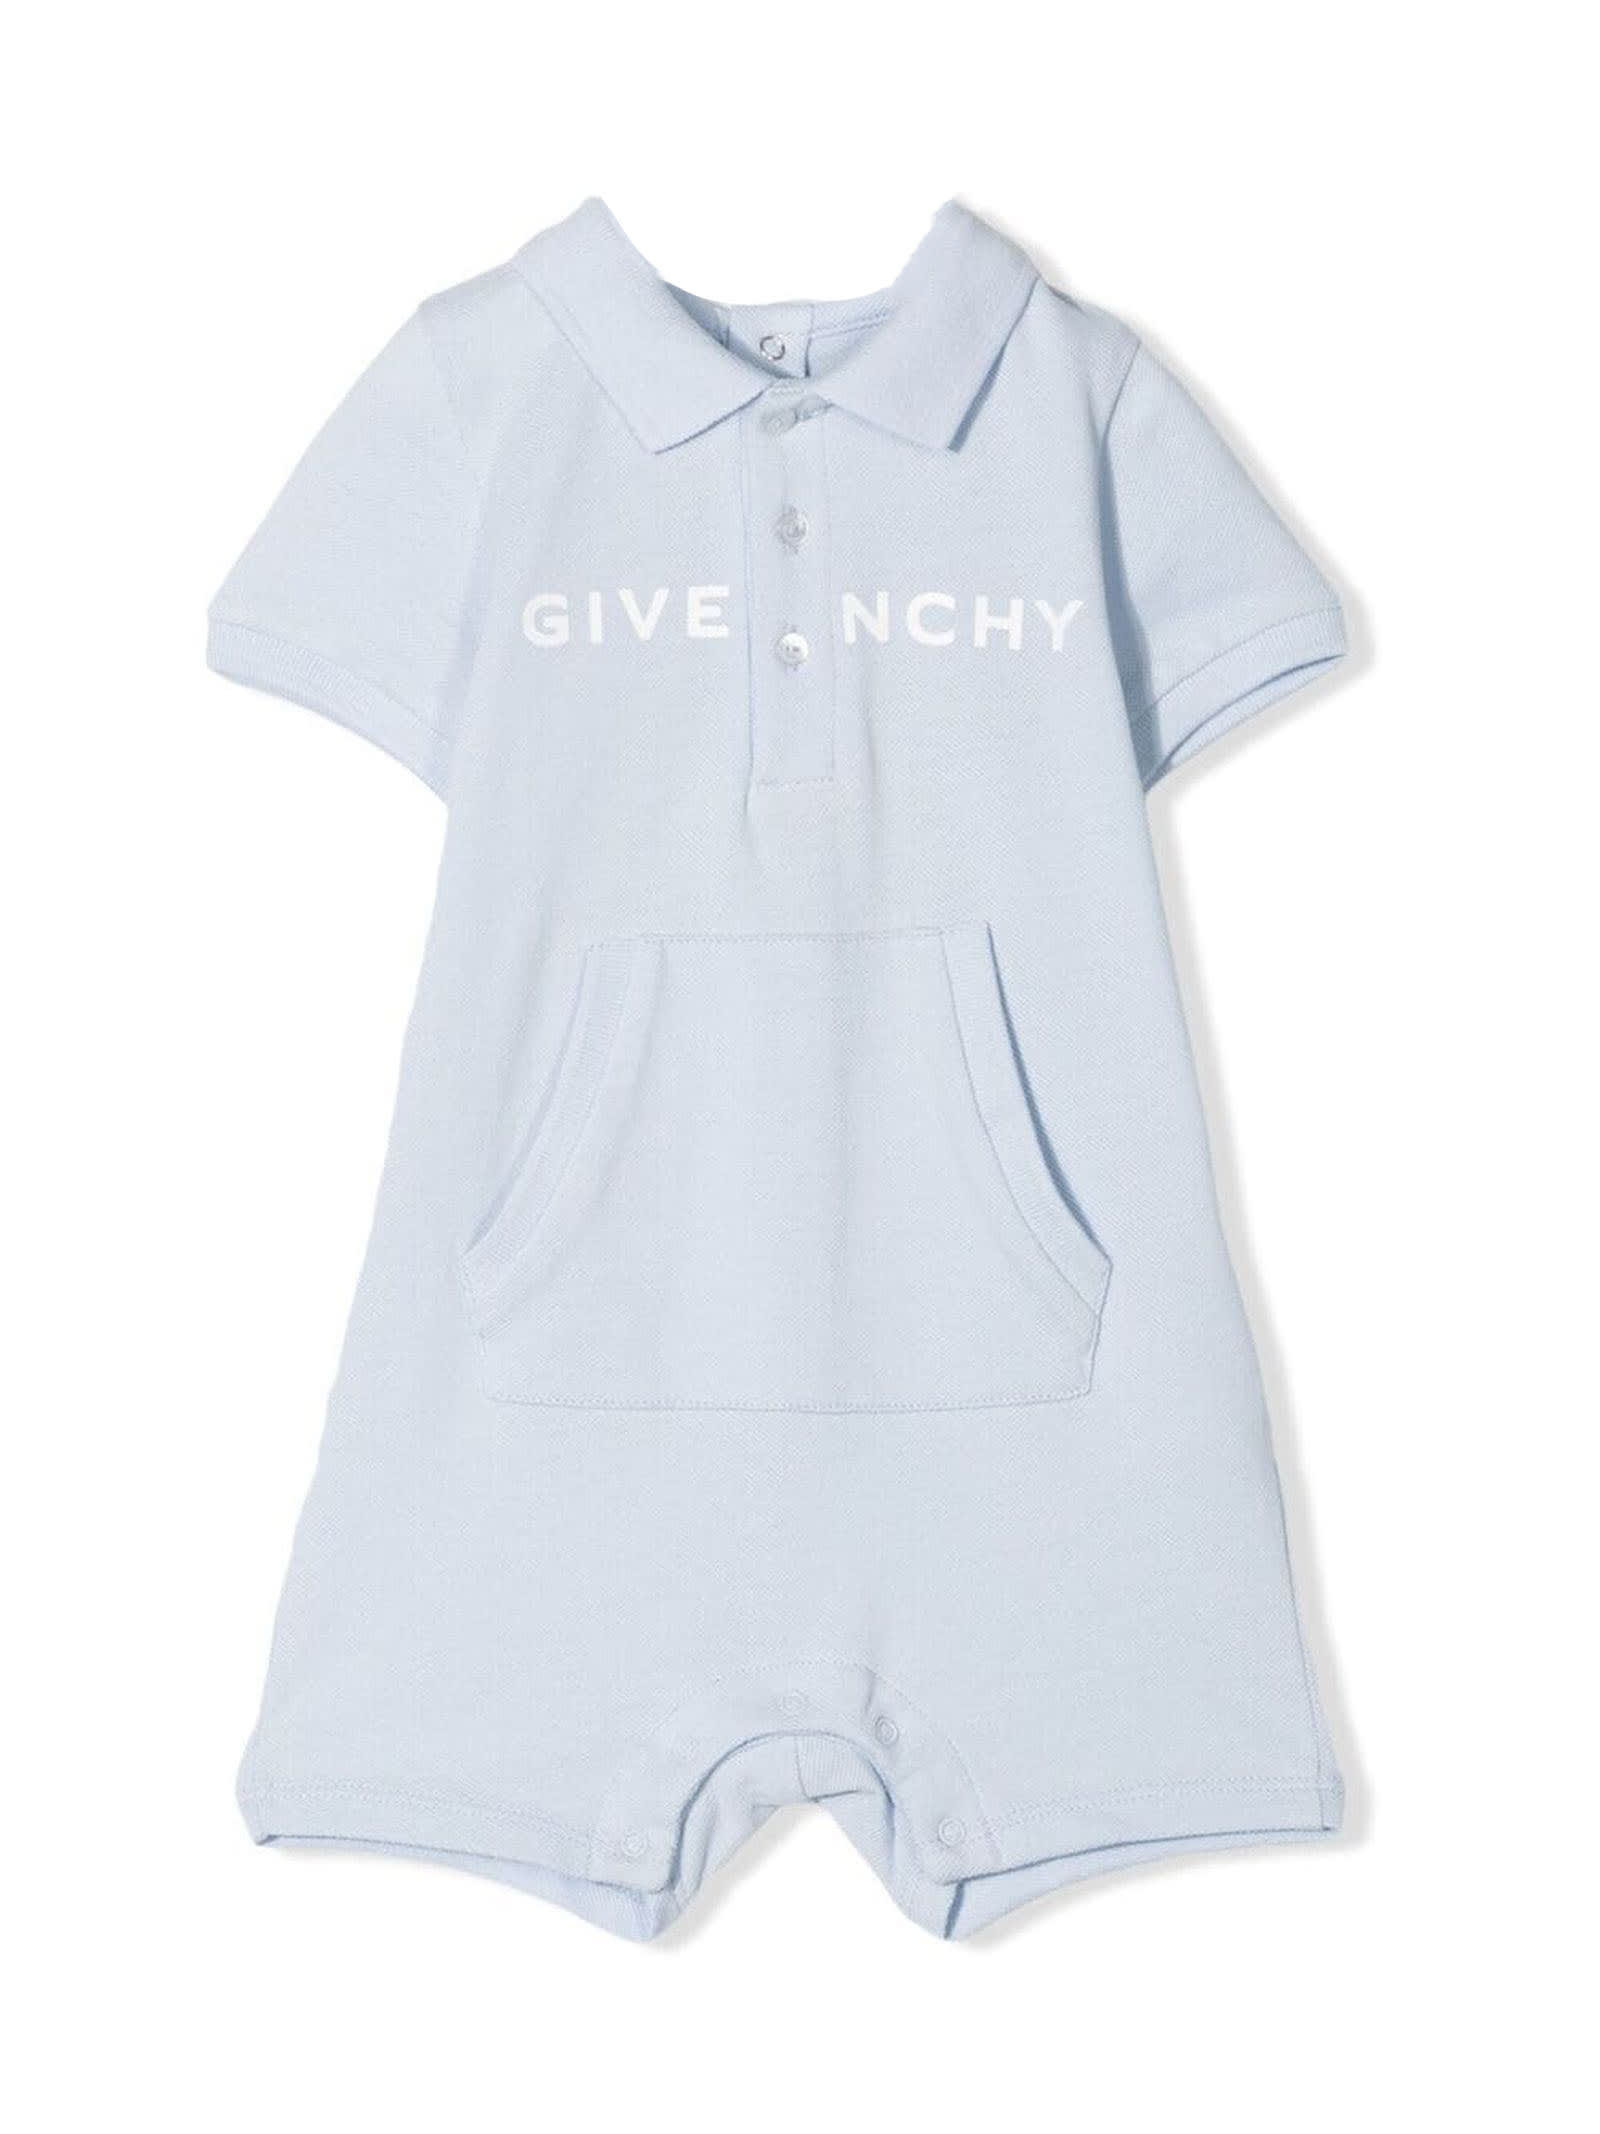 Givenchy Light Blue Stretch Cotton Rompers